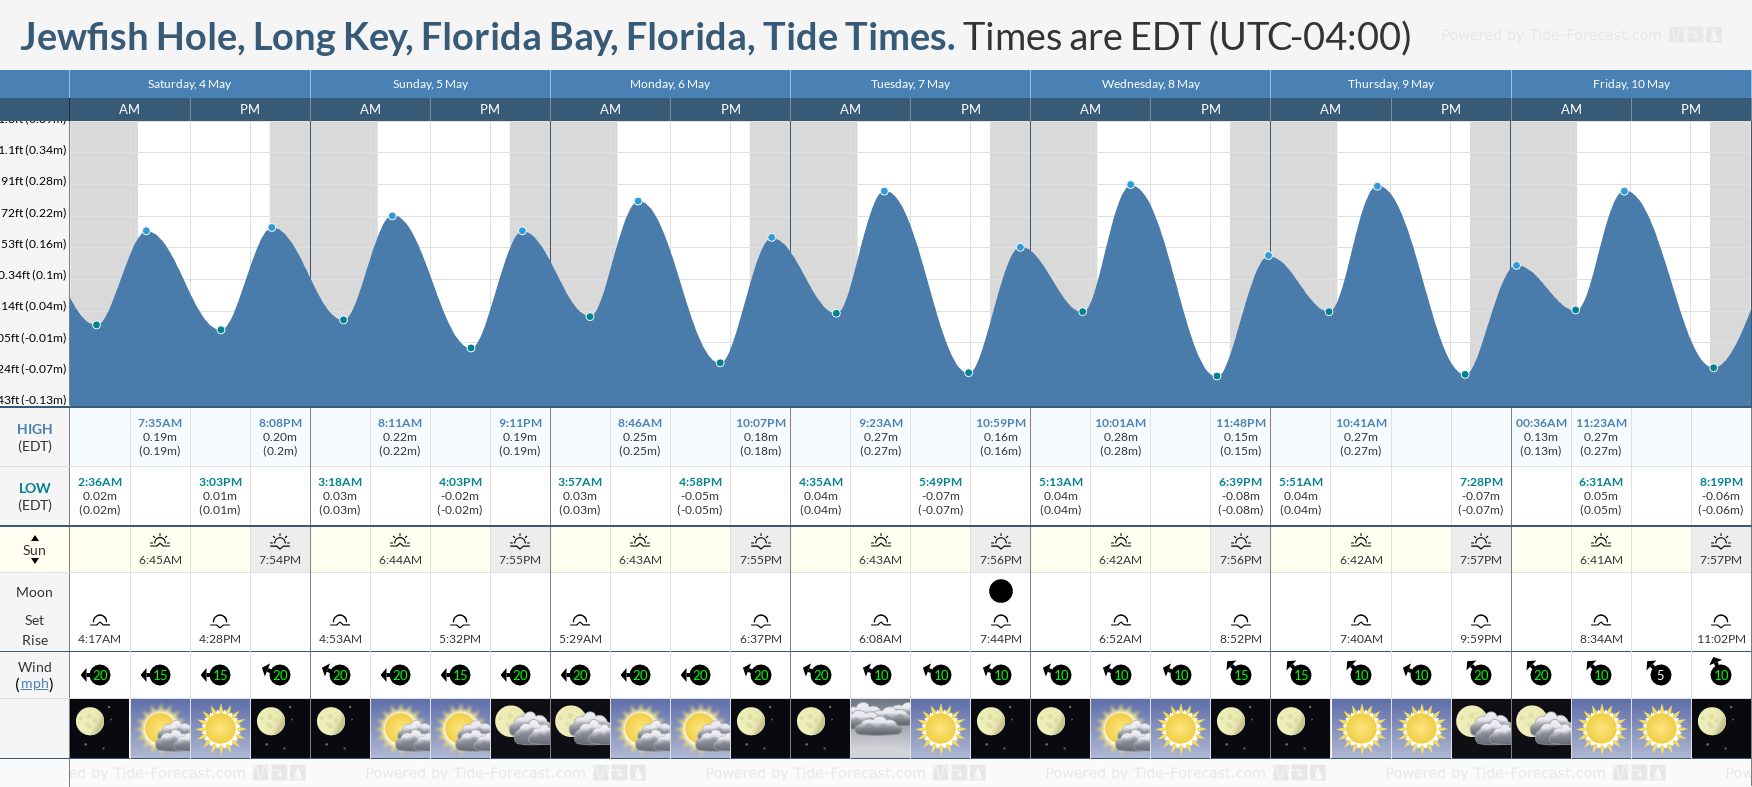 Jewfish Hole, Long Key, Florida Bay, Florida Tide Chart including high and low tide tide times for the next 7 days